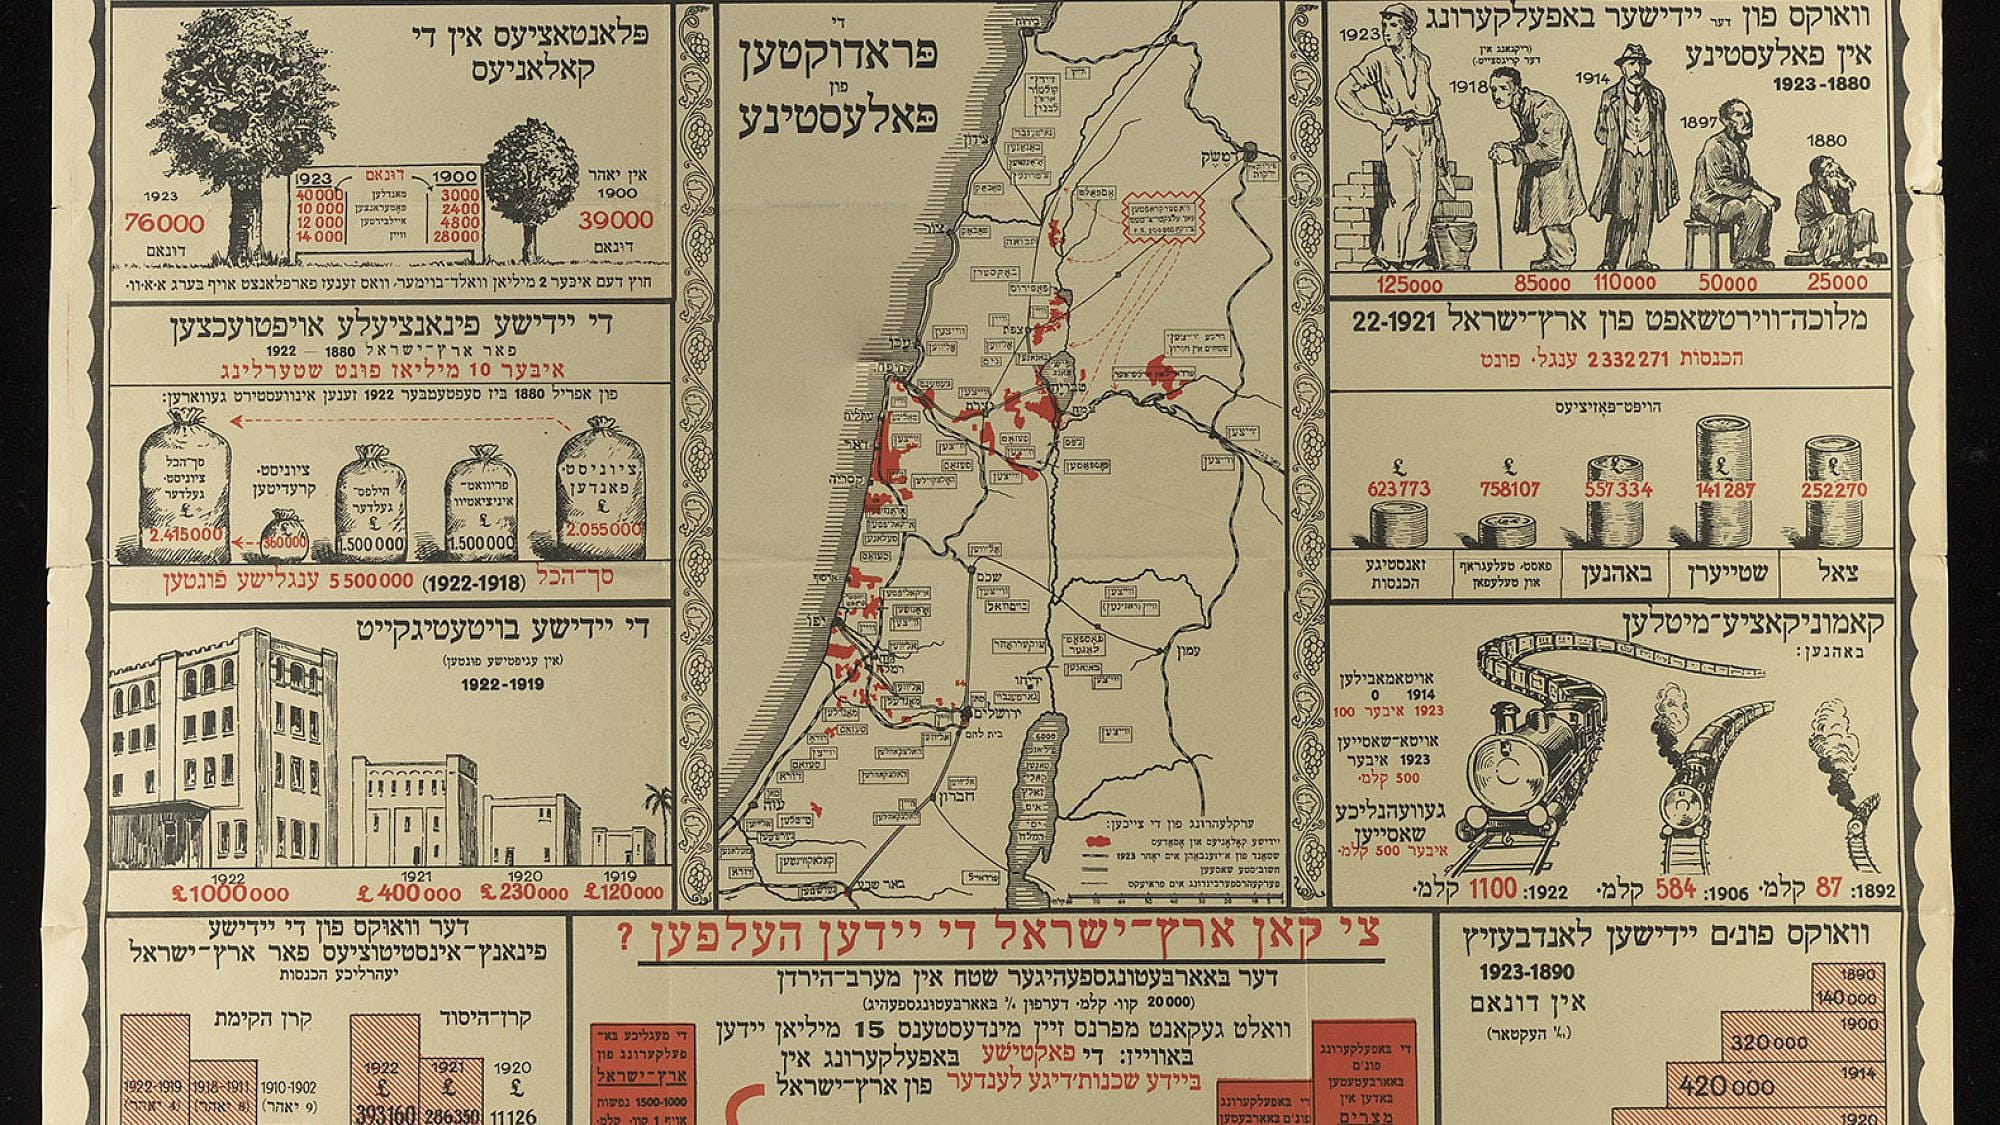 Map of Jewish Palestine with the growth of Jewish agricultural, commercial and industrial activity in the region. Berlin, 1923. Credit: YIVO Institute for Jewish Research.